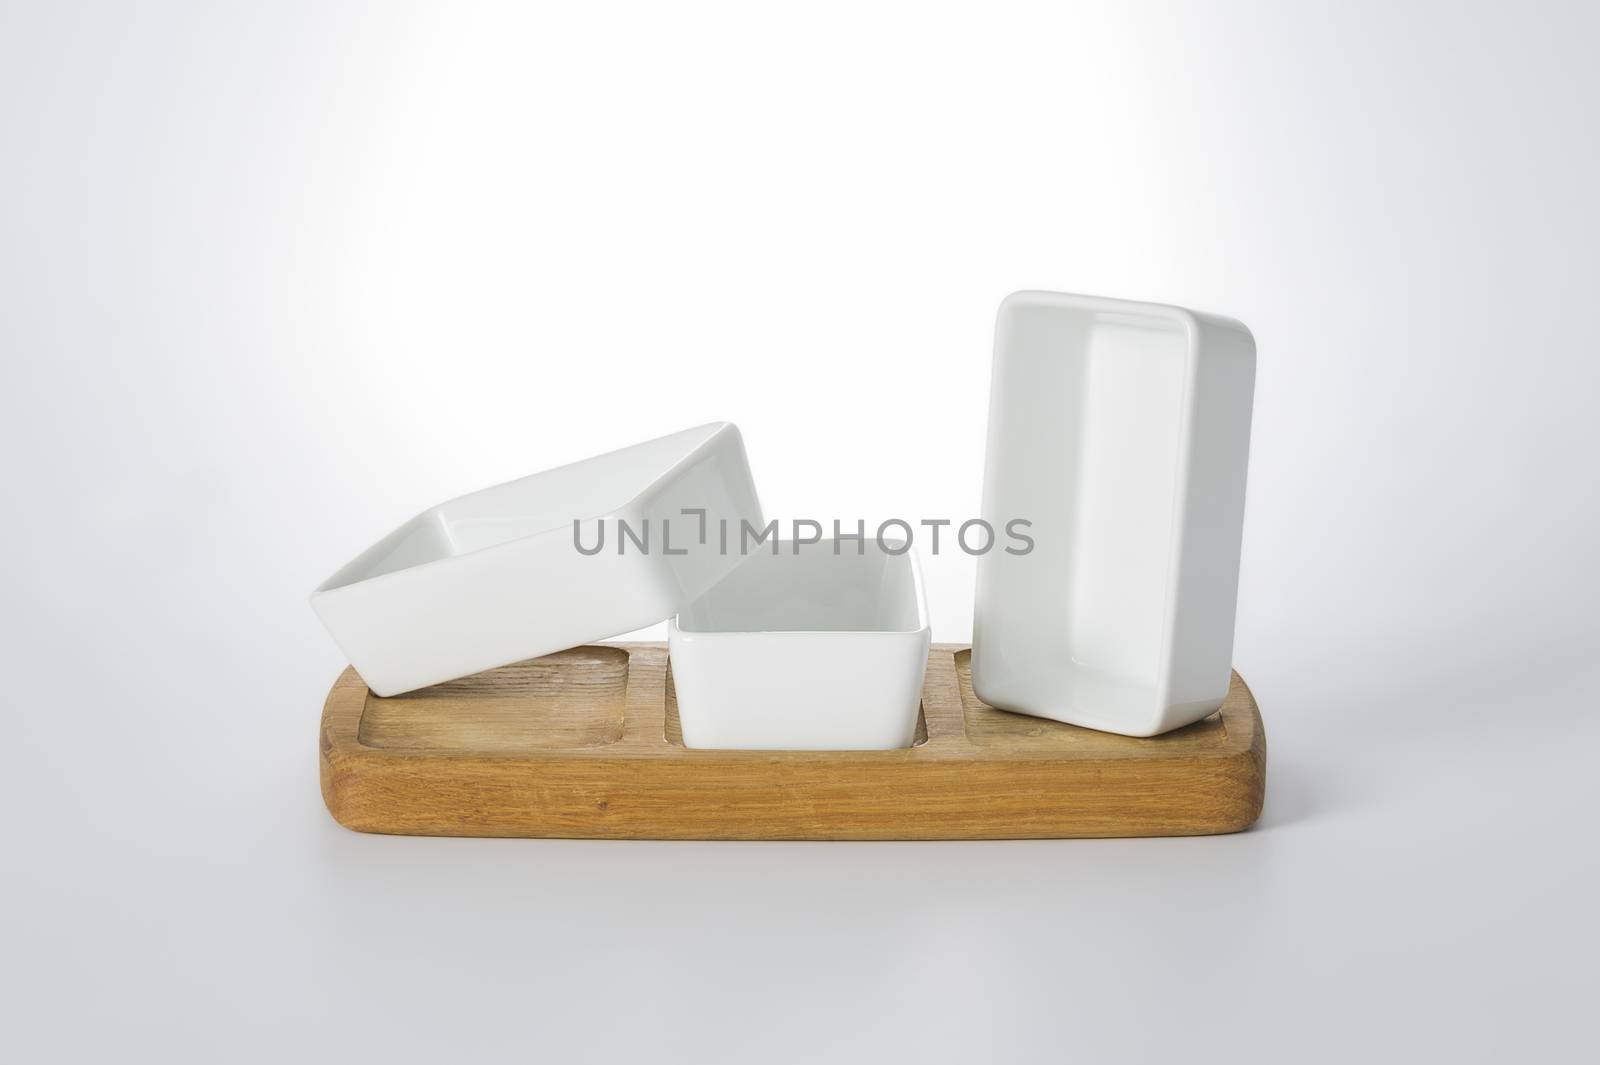 Set of three ceramic white rectangular dishes on a wooden fitted base for serving food or snacks artistically arranged in different orientations on a white background